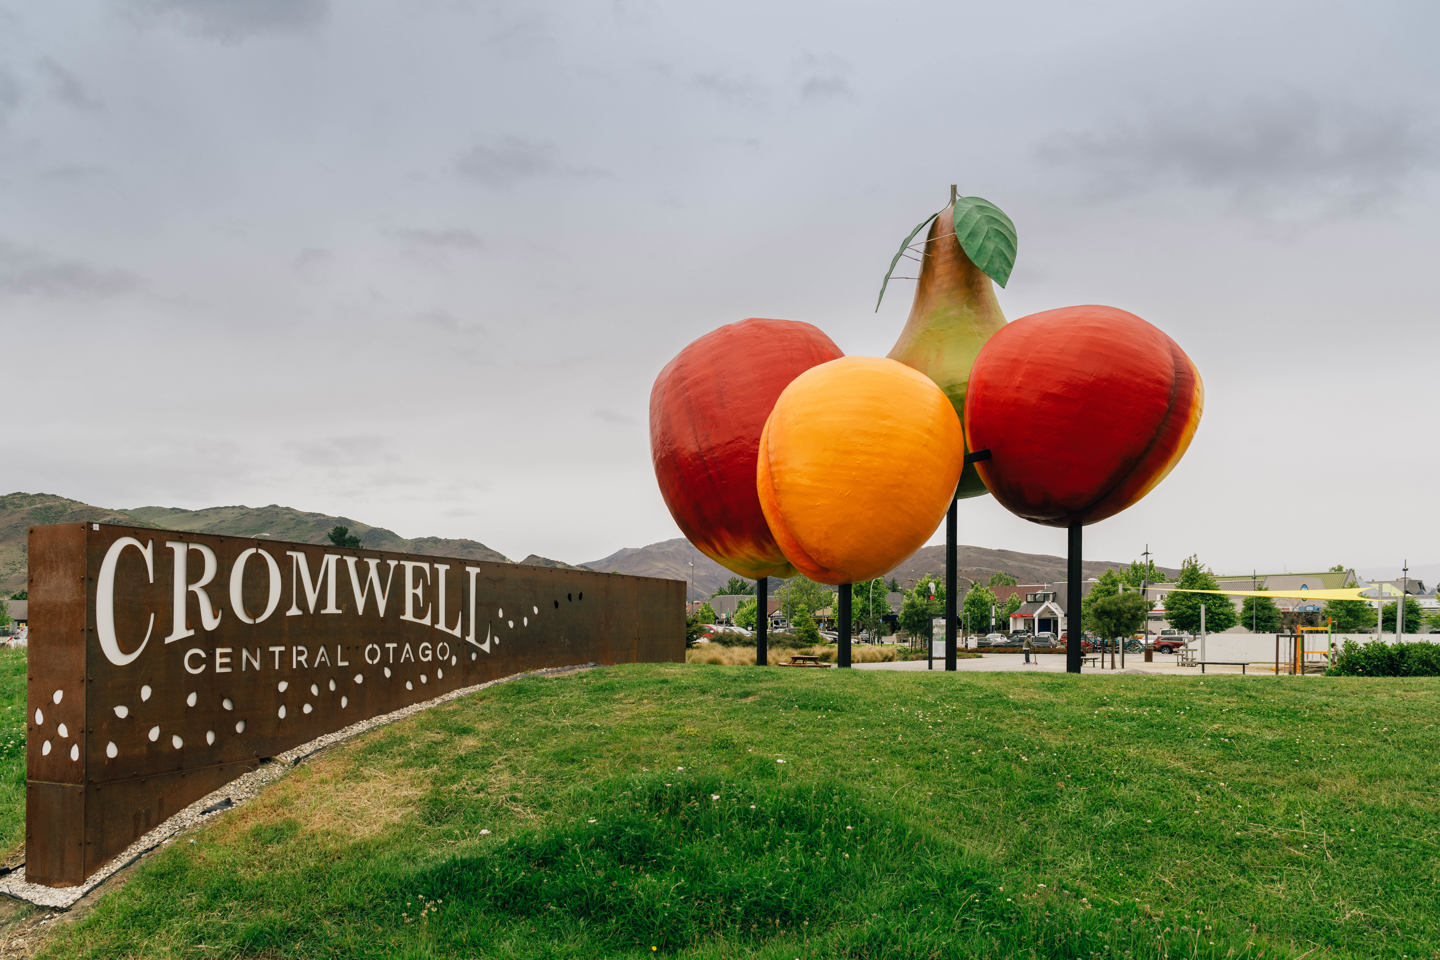 Giant fruit sculpture next to the Cromwell sign